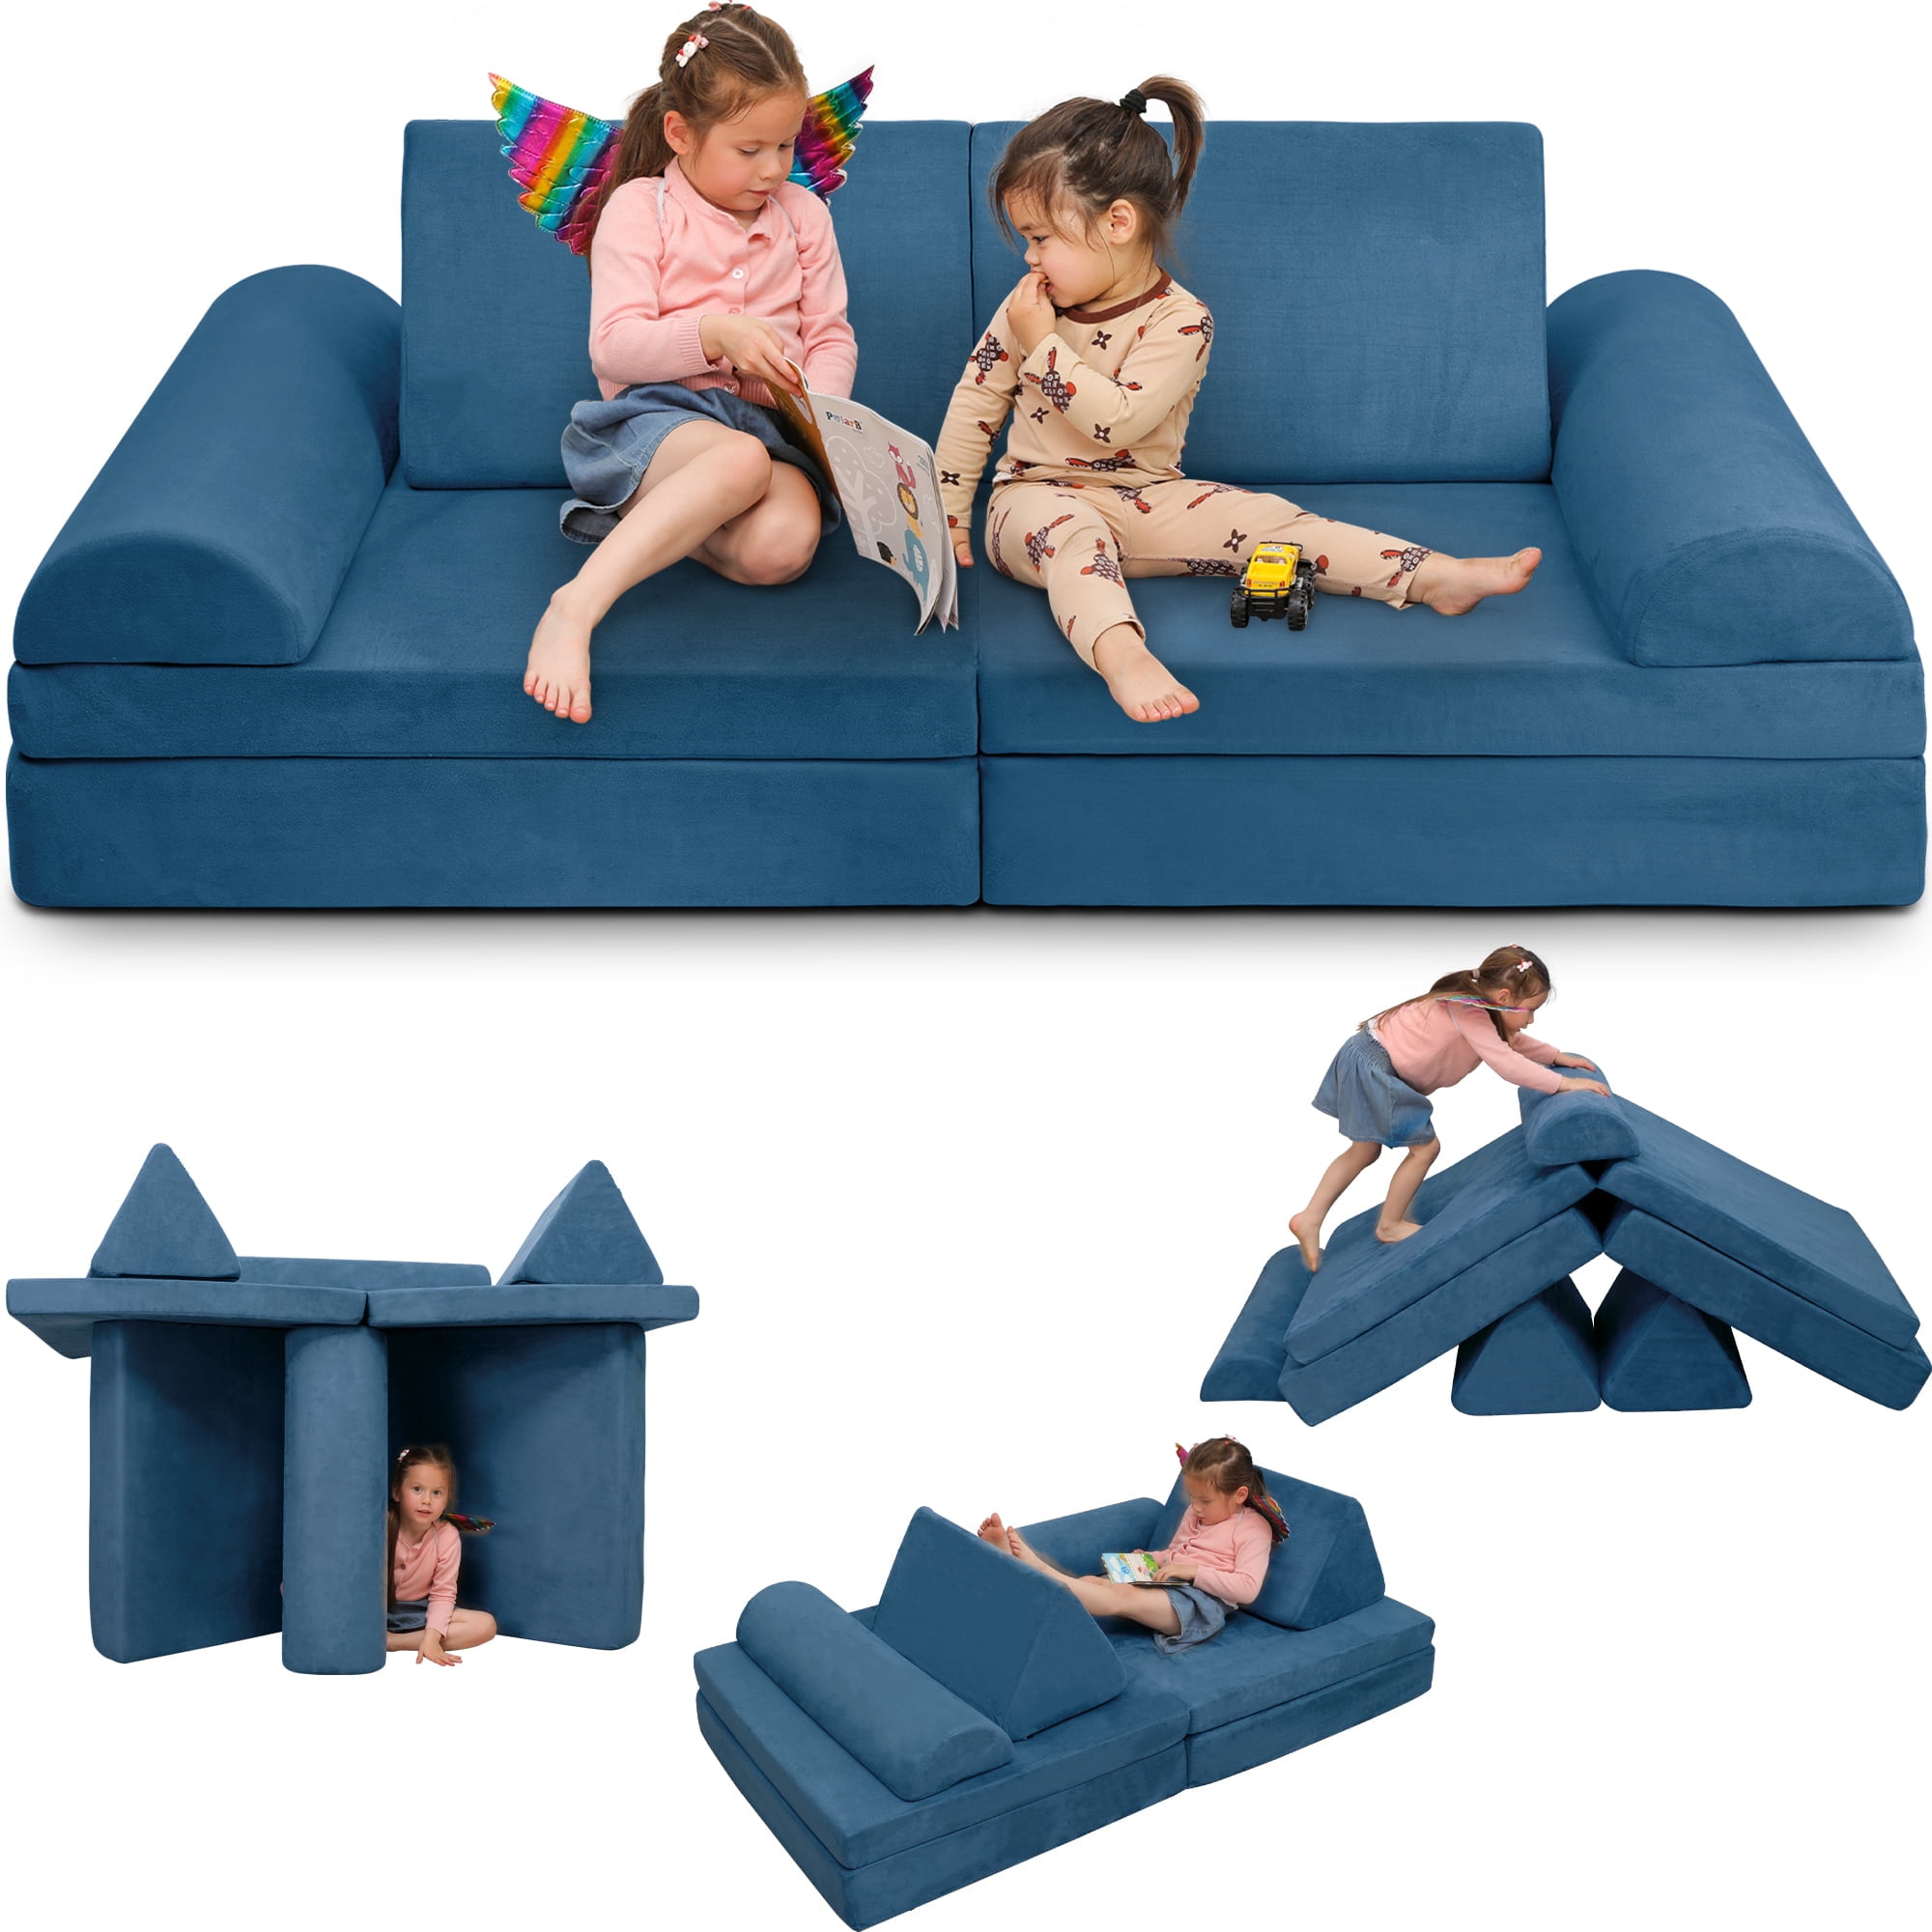 Tolead 6 Navy Toddlers, Imaginative Large, Blue Play Kids for pcs Couch Furniture